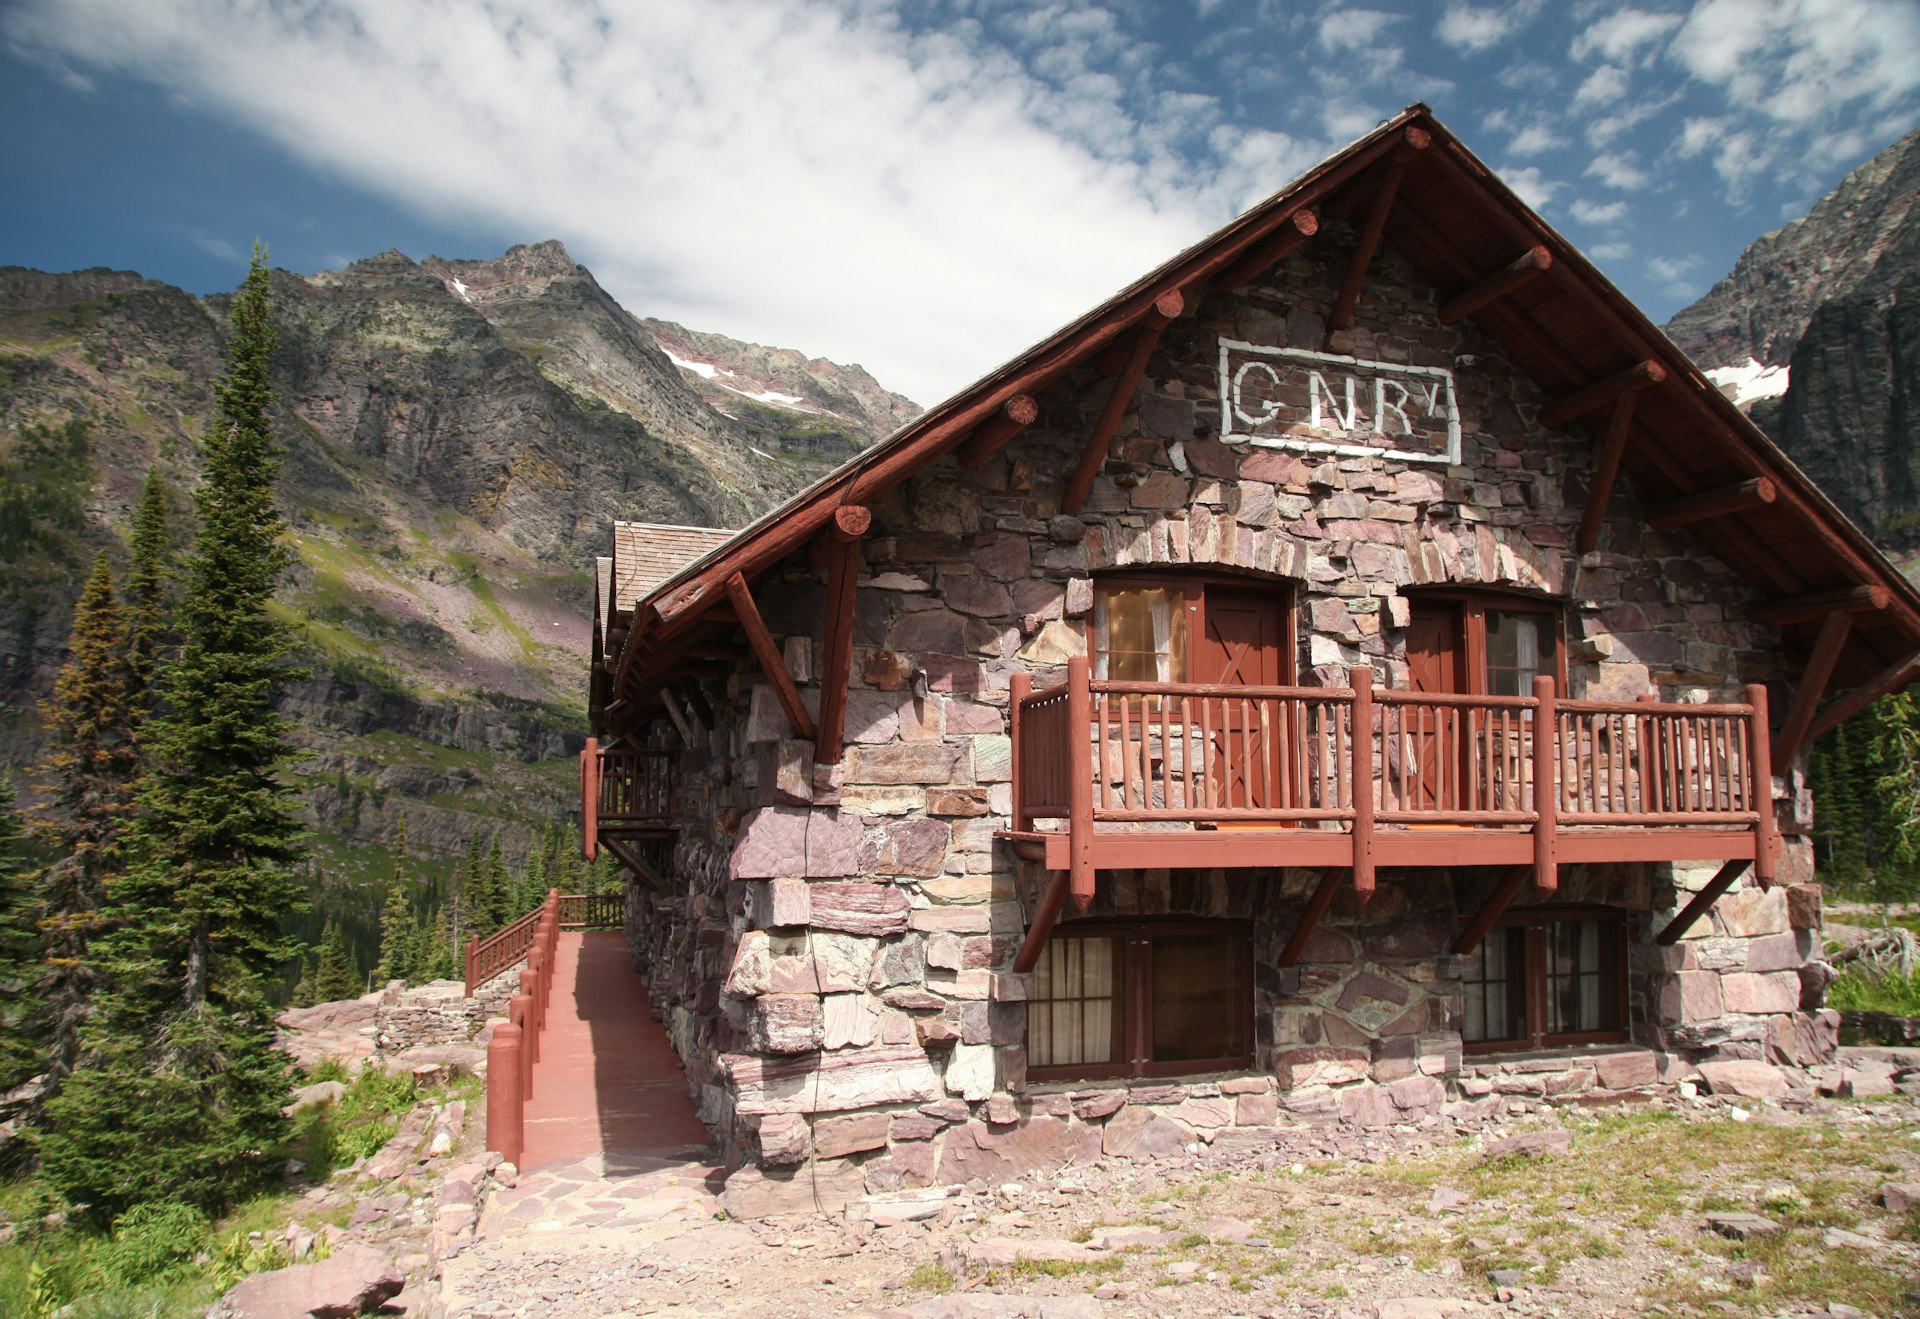 Sperry Chalet built by the Great Northern Railway in Glacier National Park, Montana